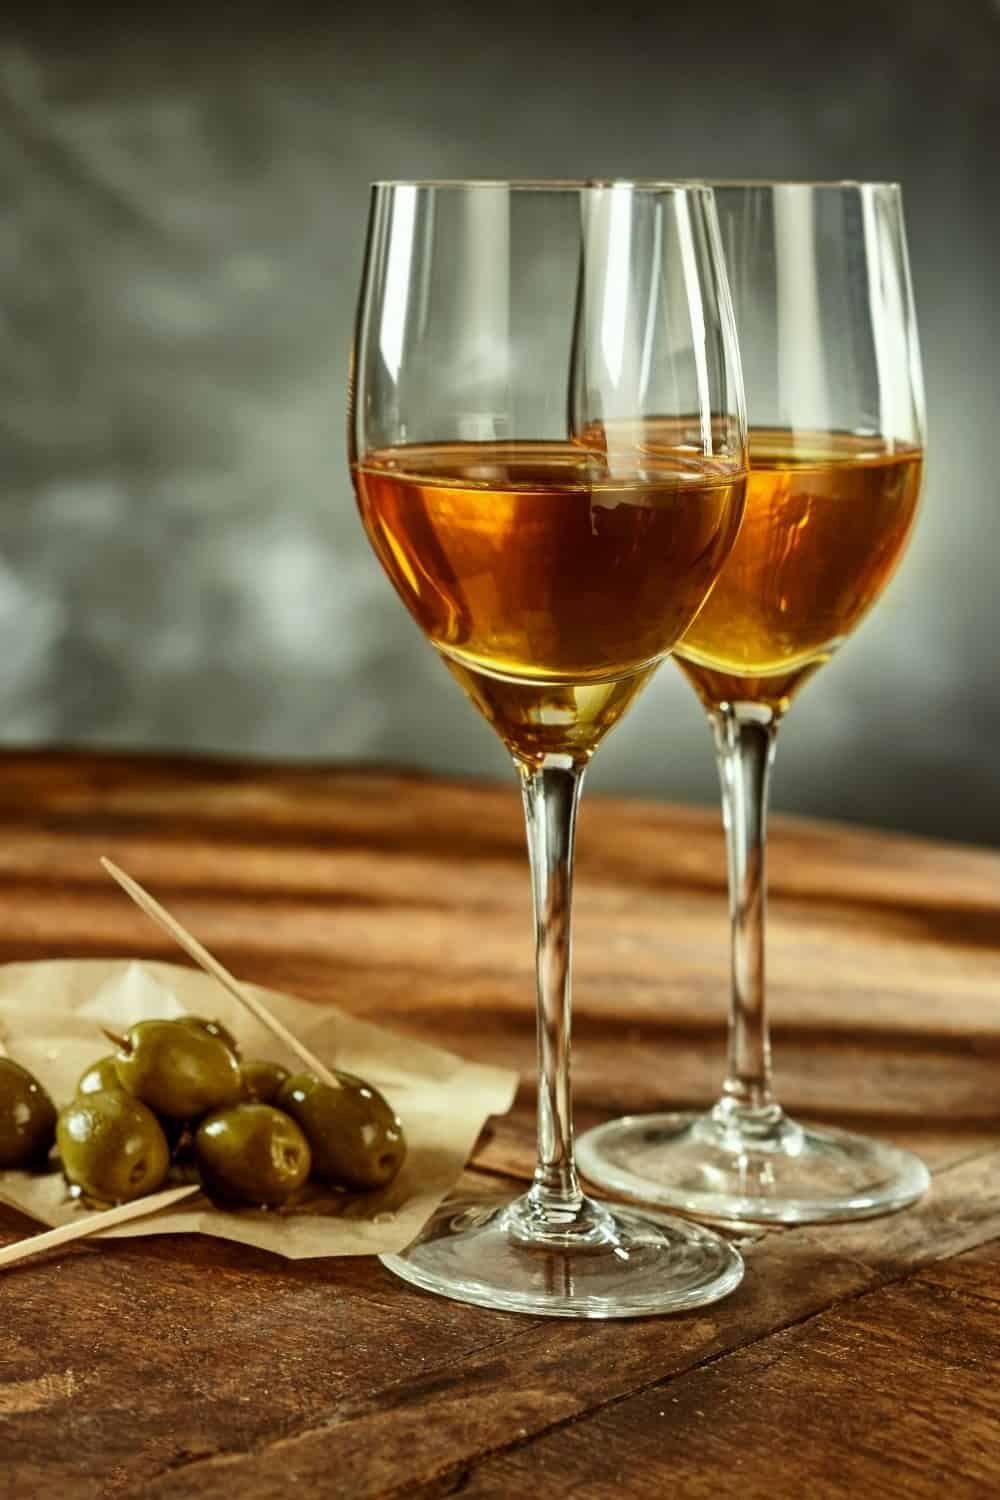 Profile Still Life of Two Glasses of Warm Sherry Wine